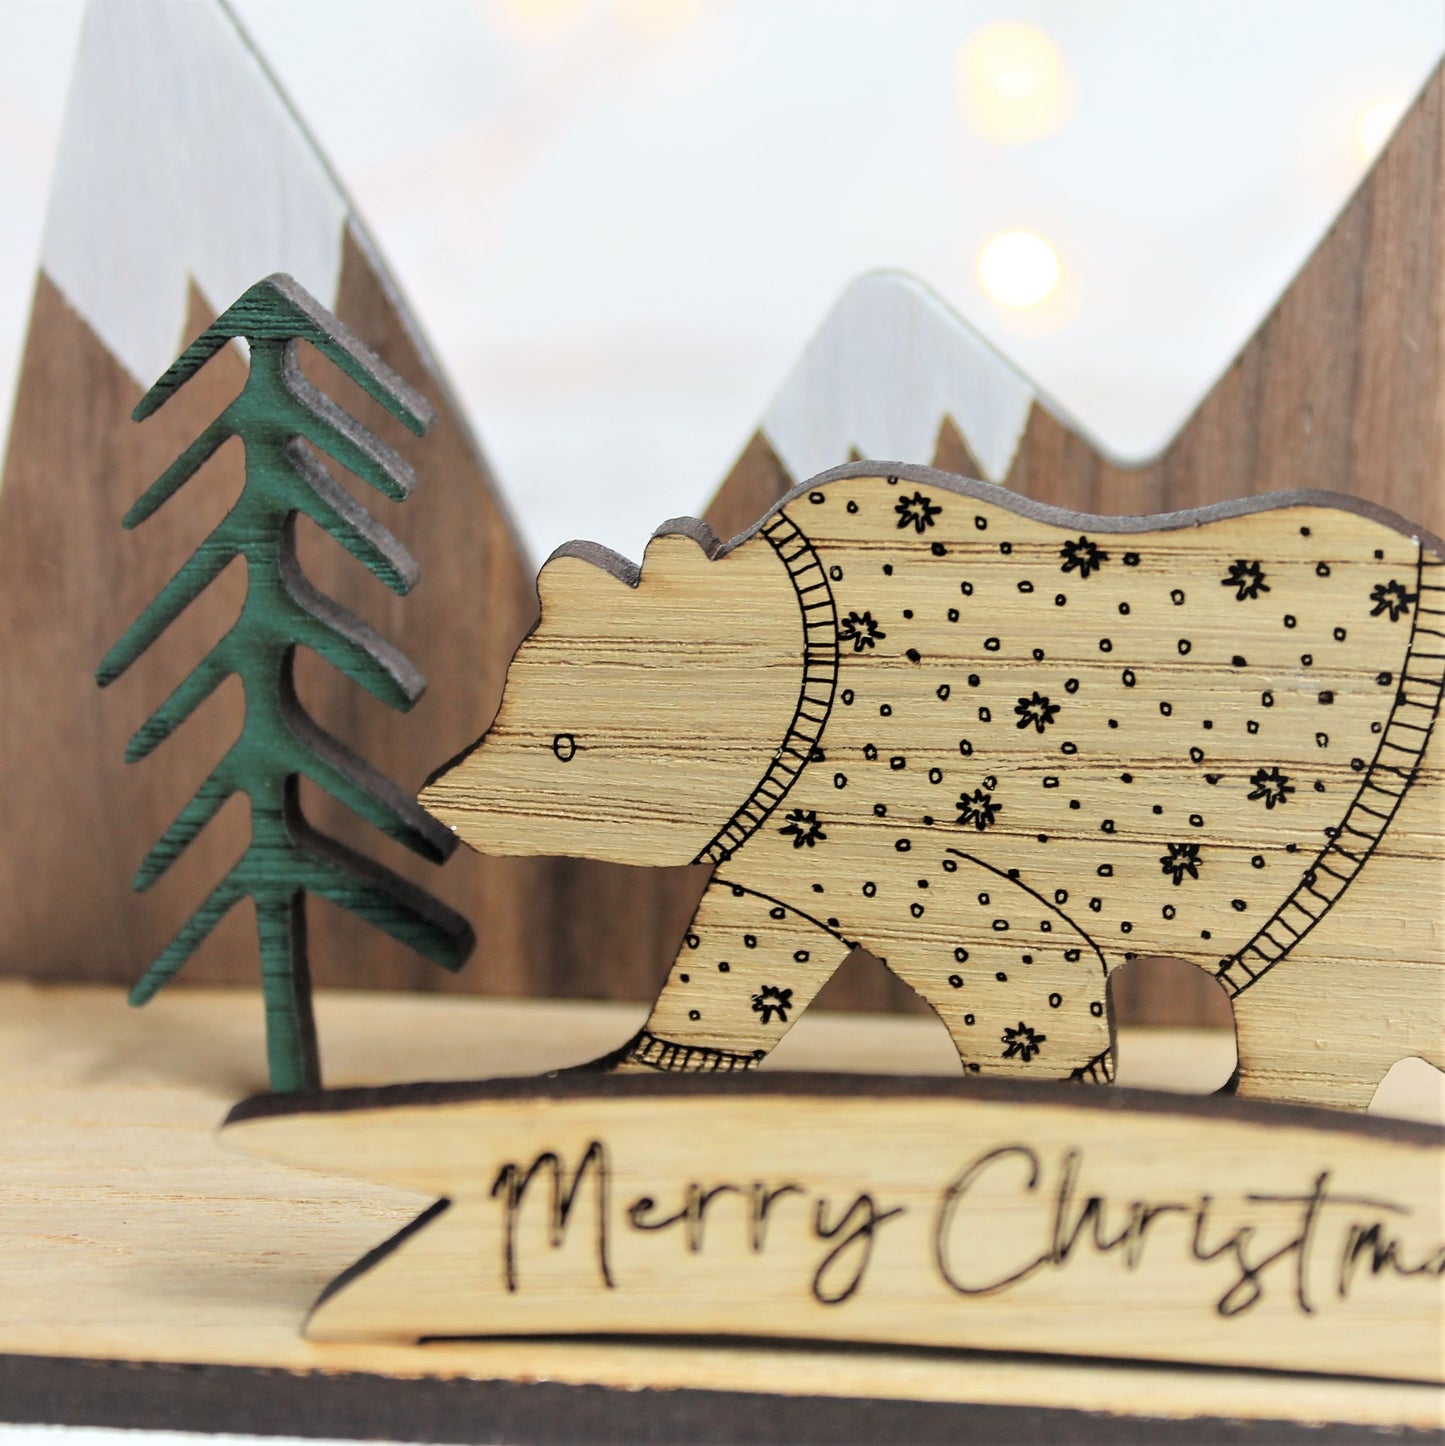 3d wooden ornament with mountain and forest scene, and a festive jumper bear